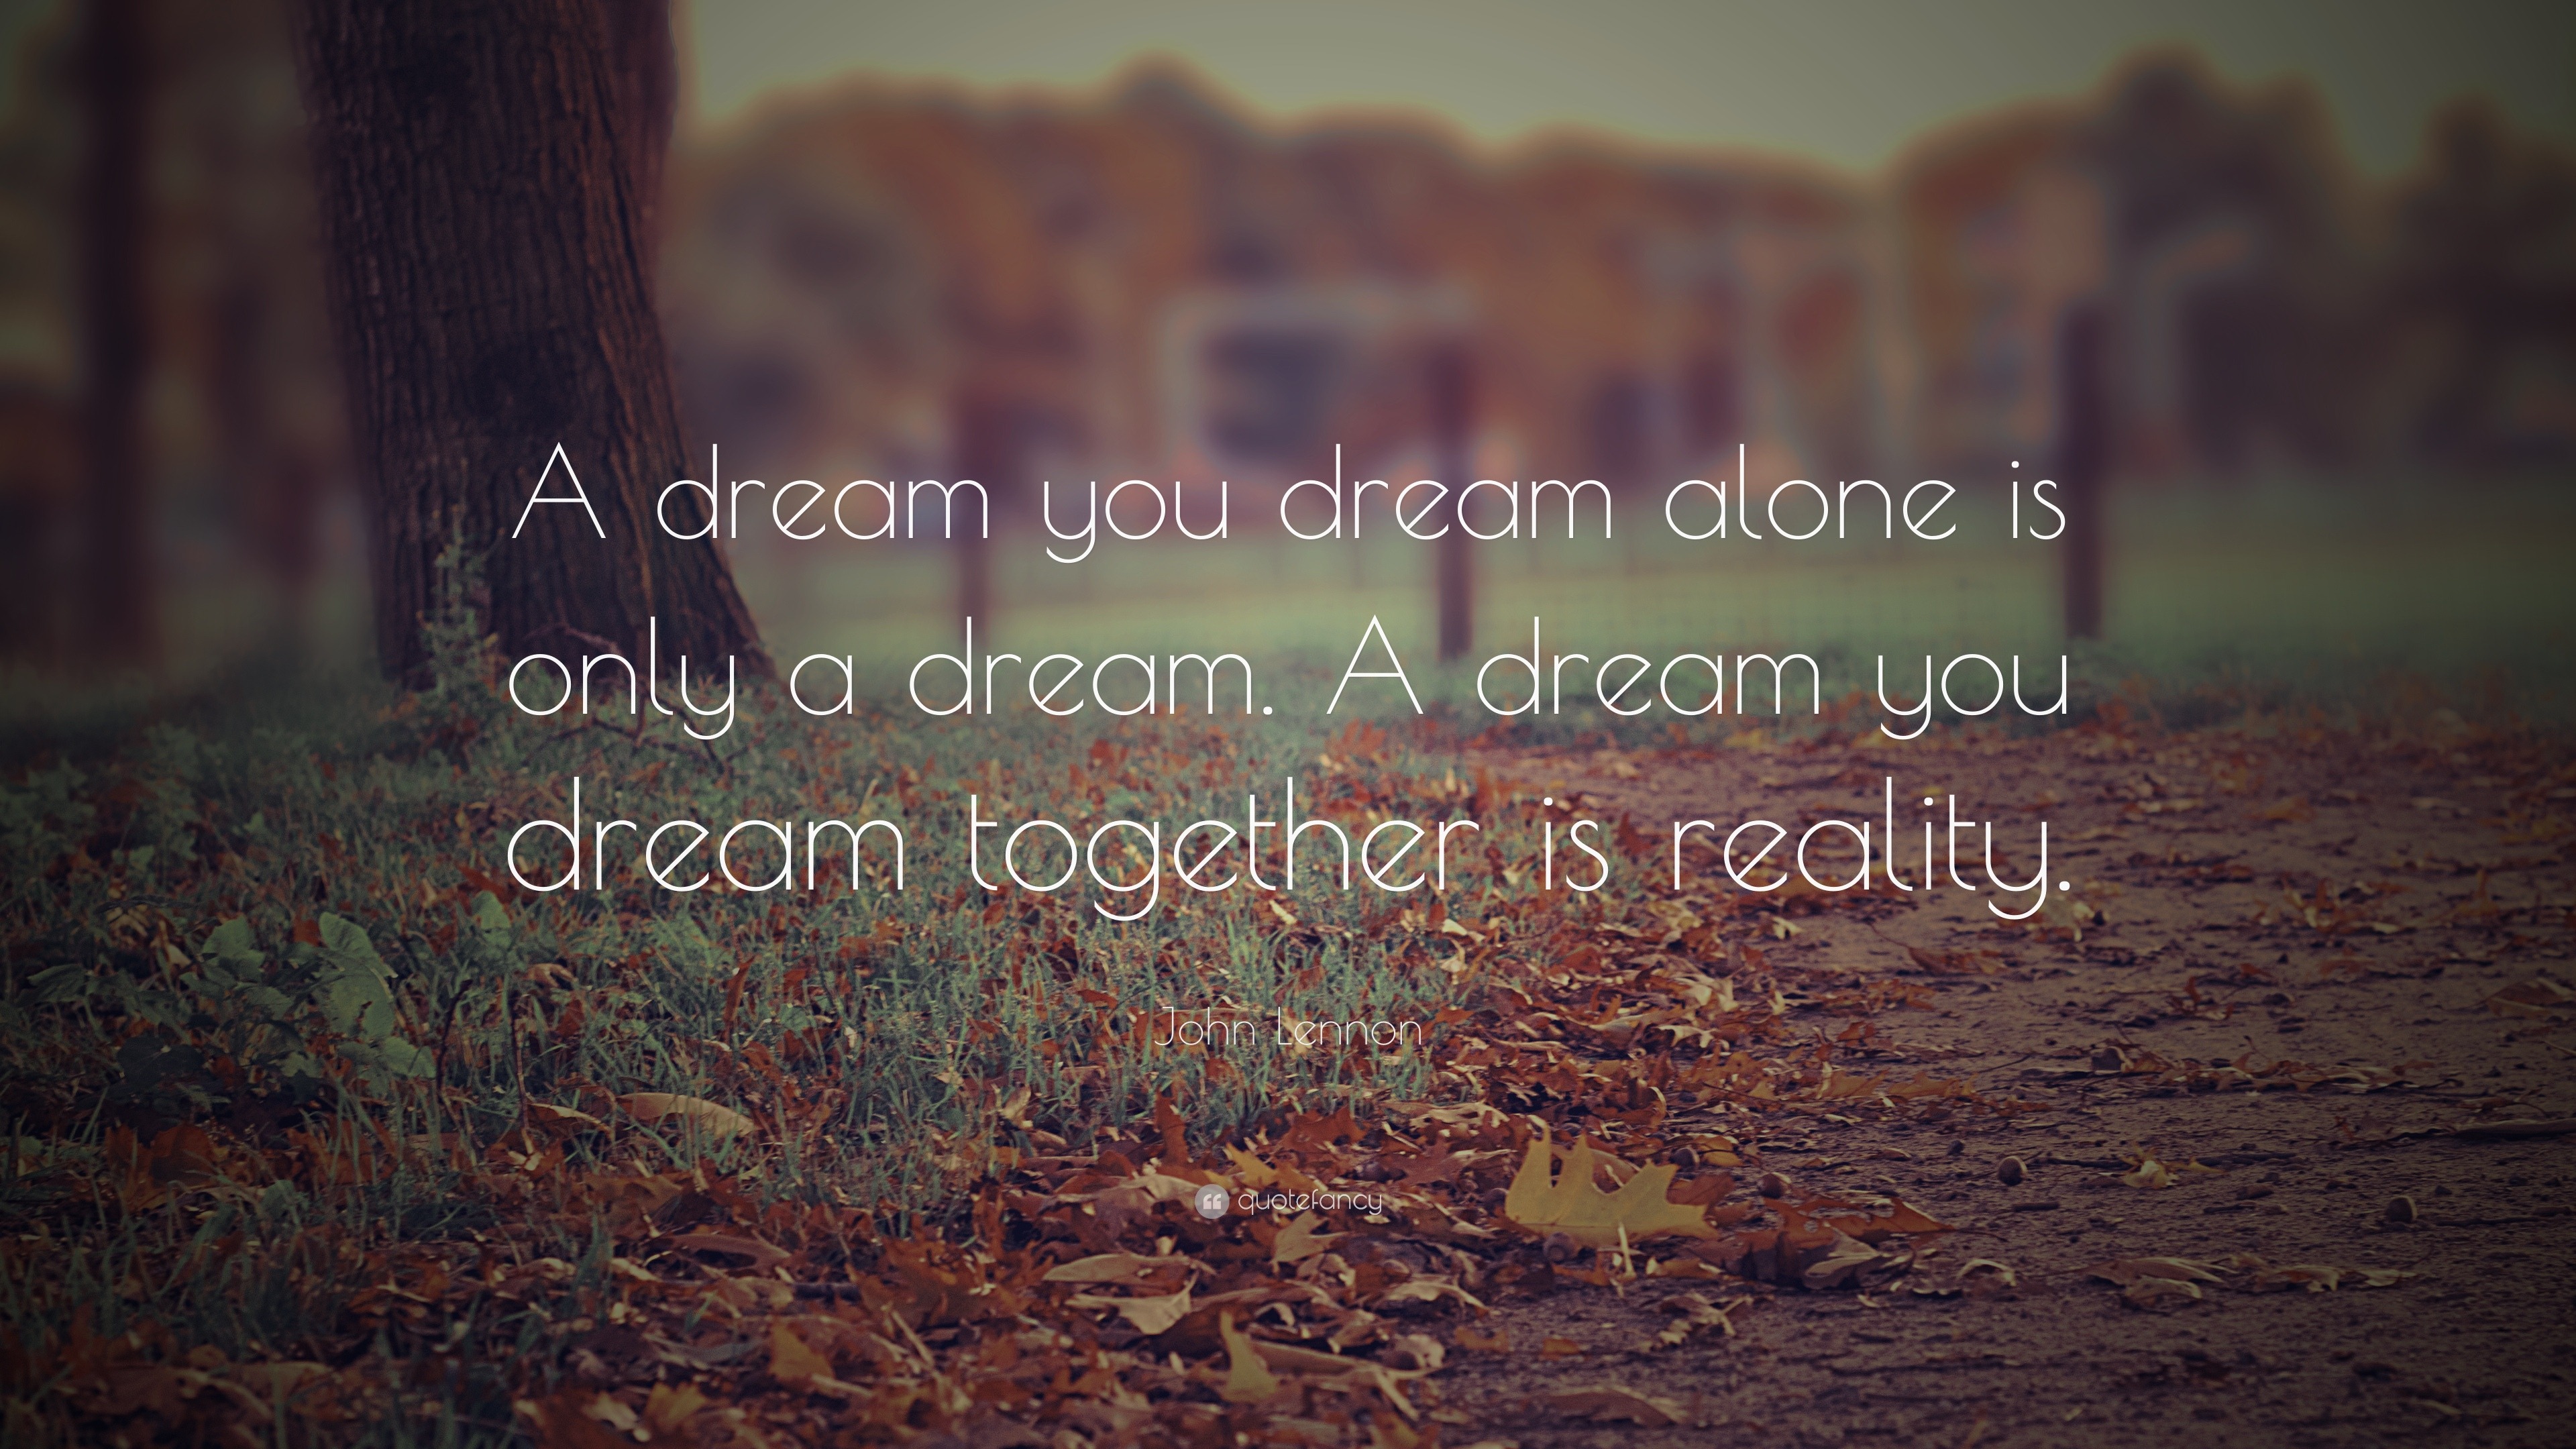 John Lennon Quote “A dream you dream alone is only a dream A